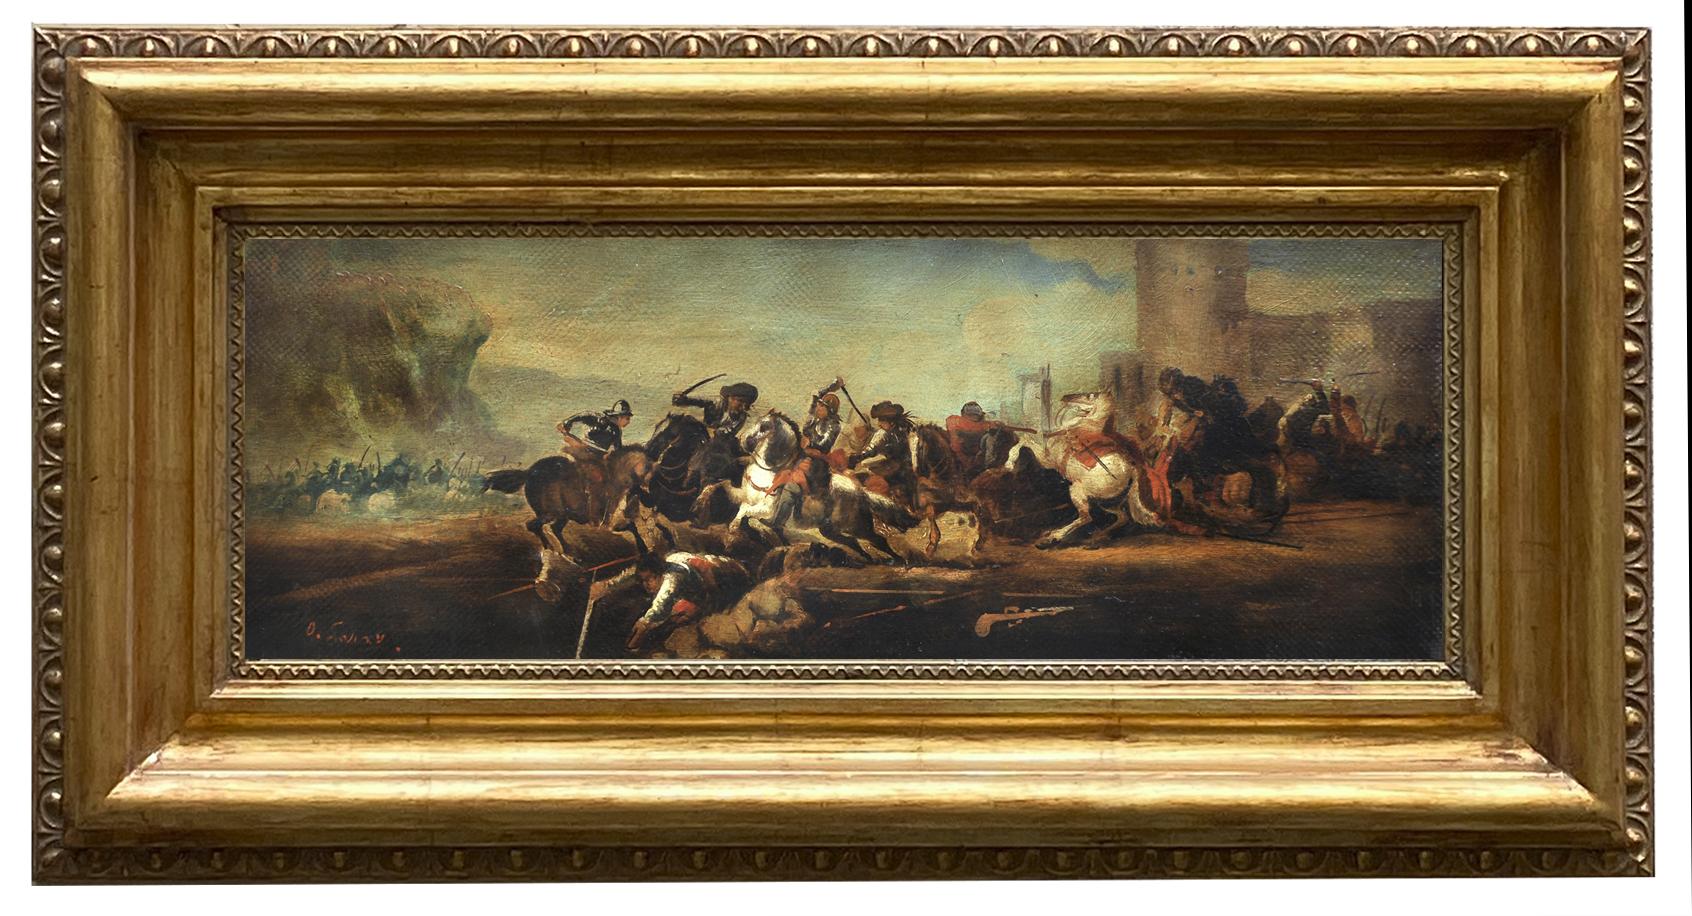 Land battle - Antonio Savisio Italia 2006 - Oil on canvas cm.20x55
Frame available on request from our workshop.

Maestro Antonio Savisio drew inspiration from the masterpieces of the great Neapolitan Maestro Salvator Rosa who was the author of